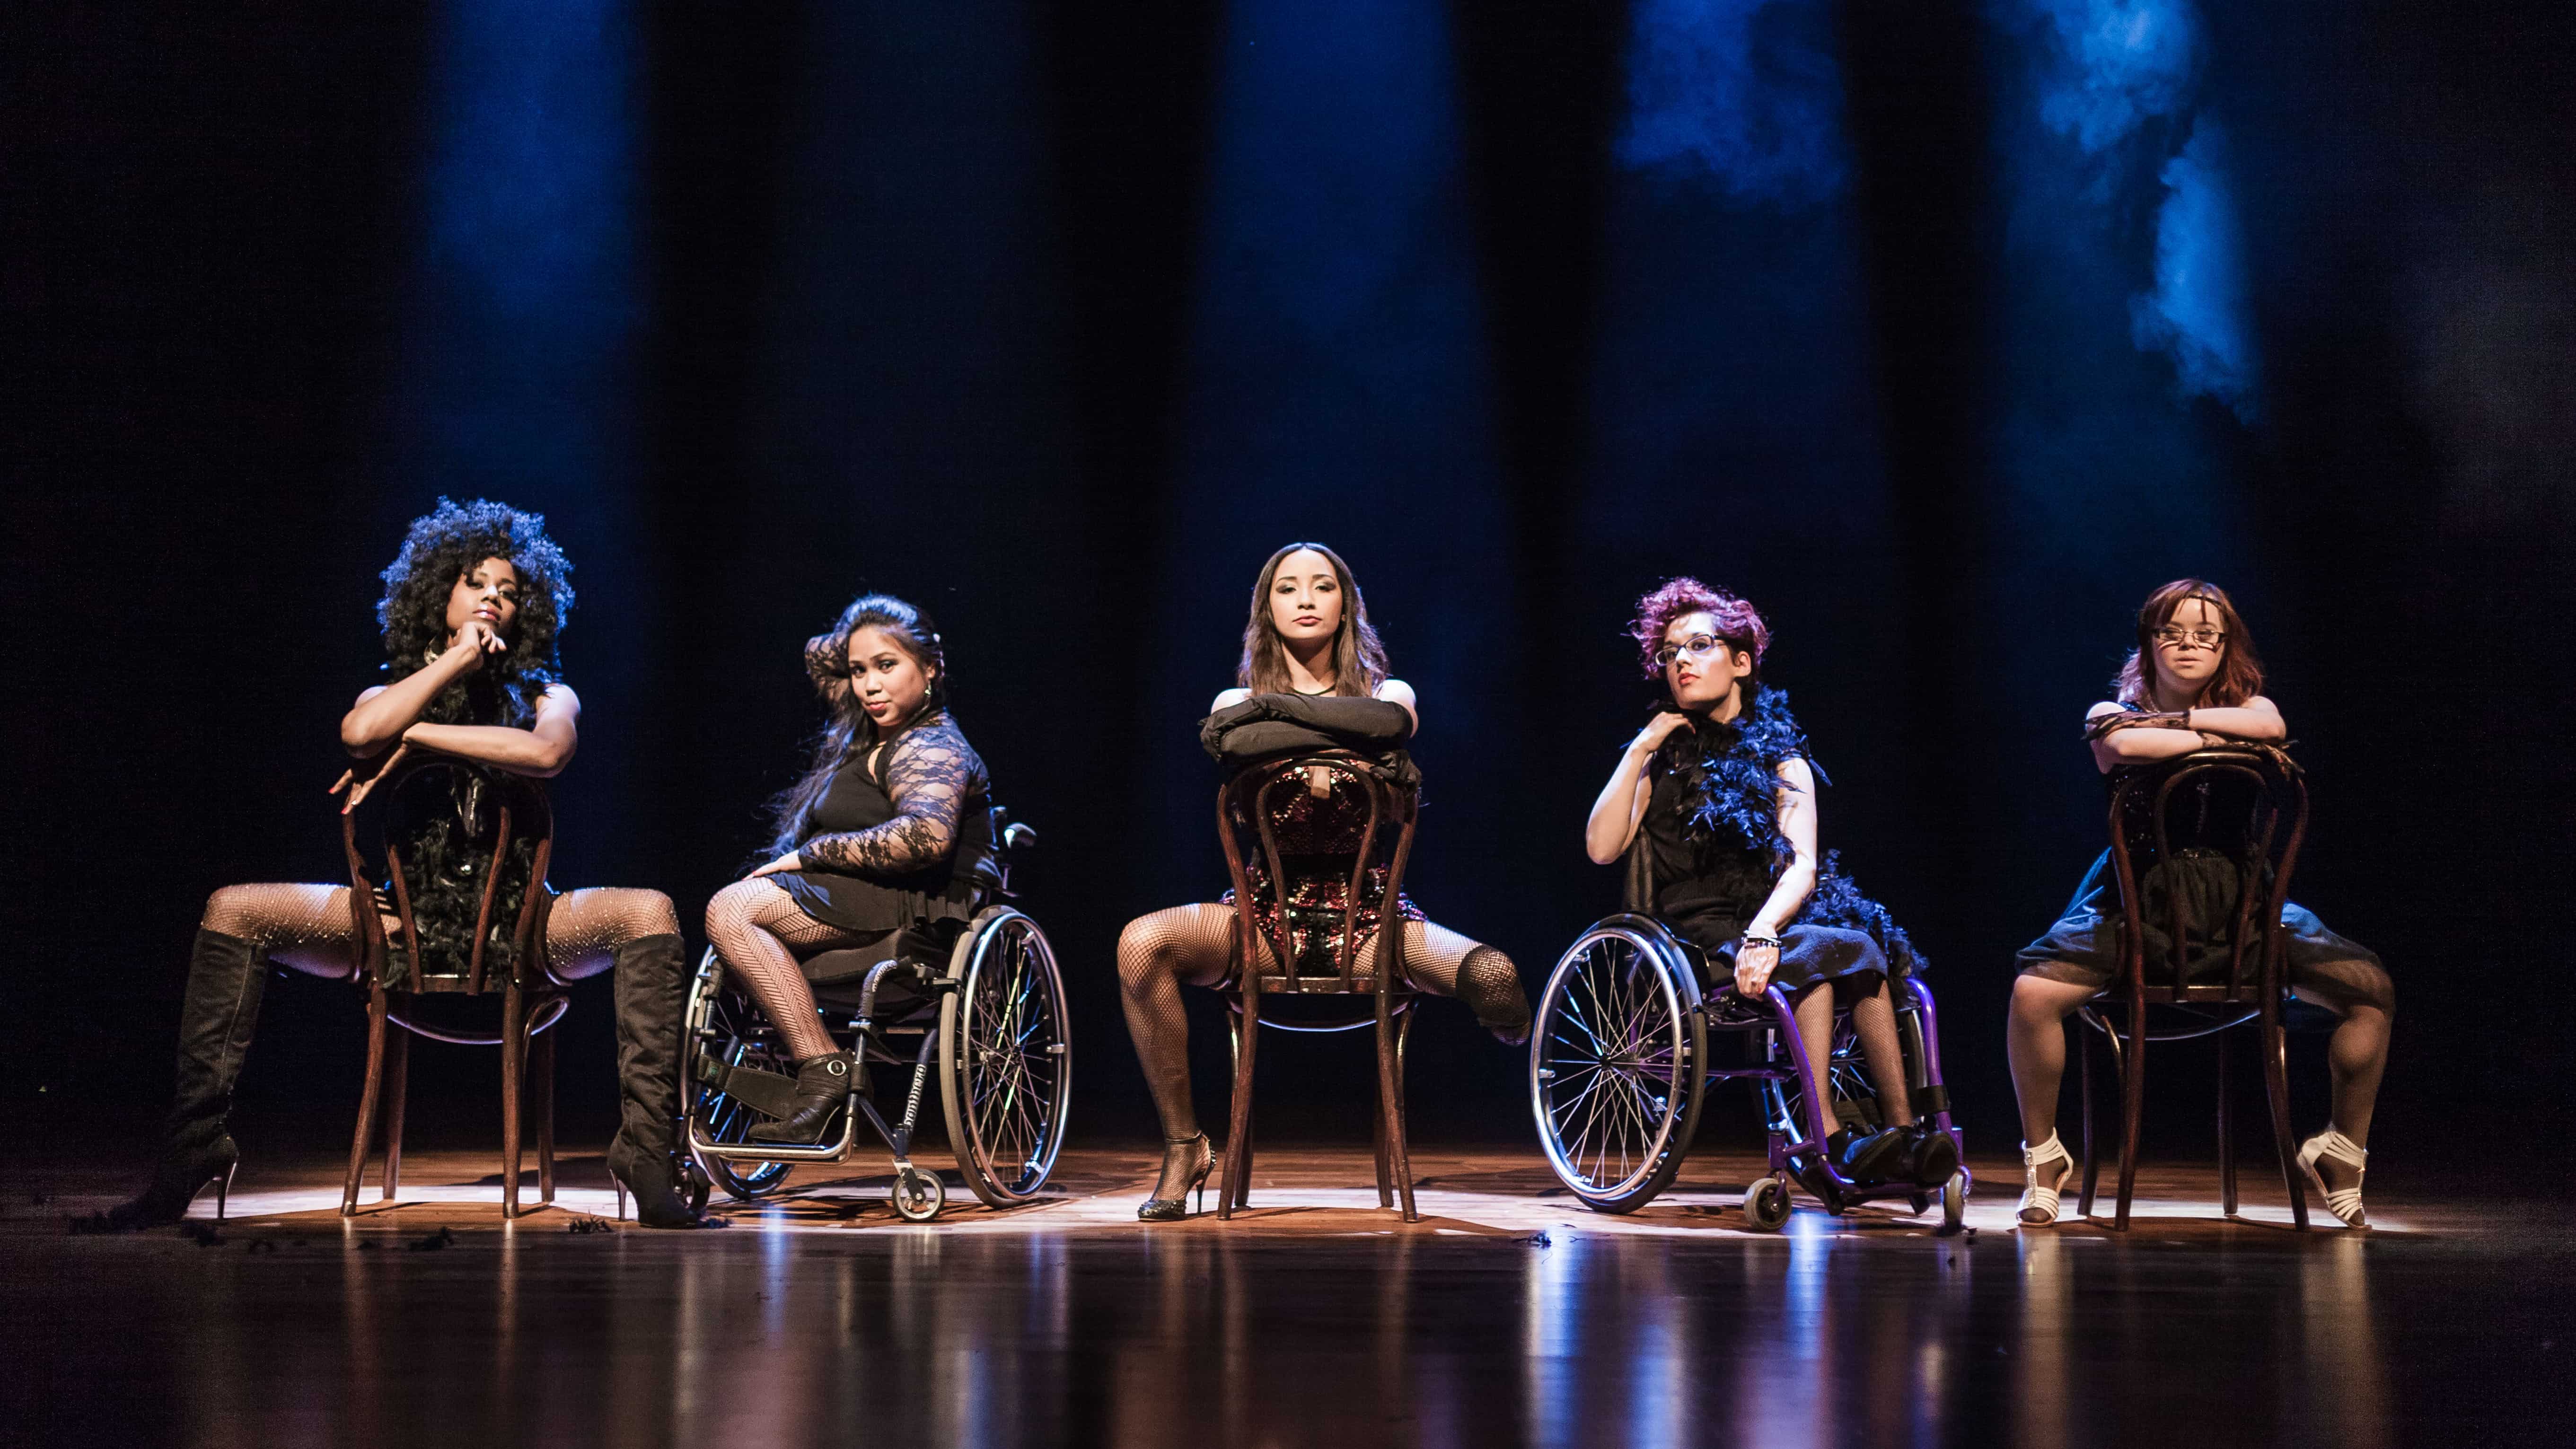 11 Million Reasons to Dance. Chicago ft Laura Dajao (second left). Pic by Sean Goldthorpe